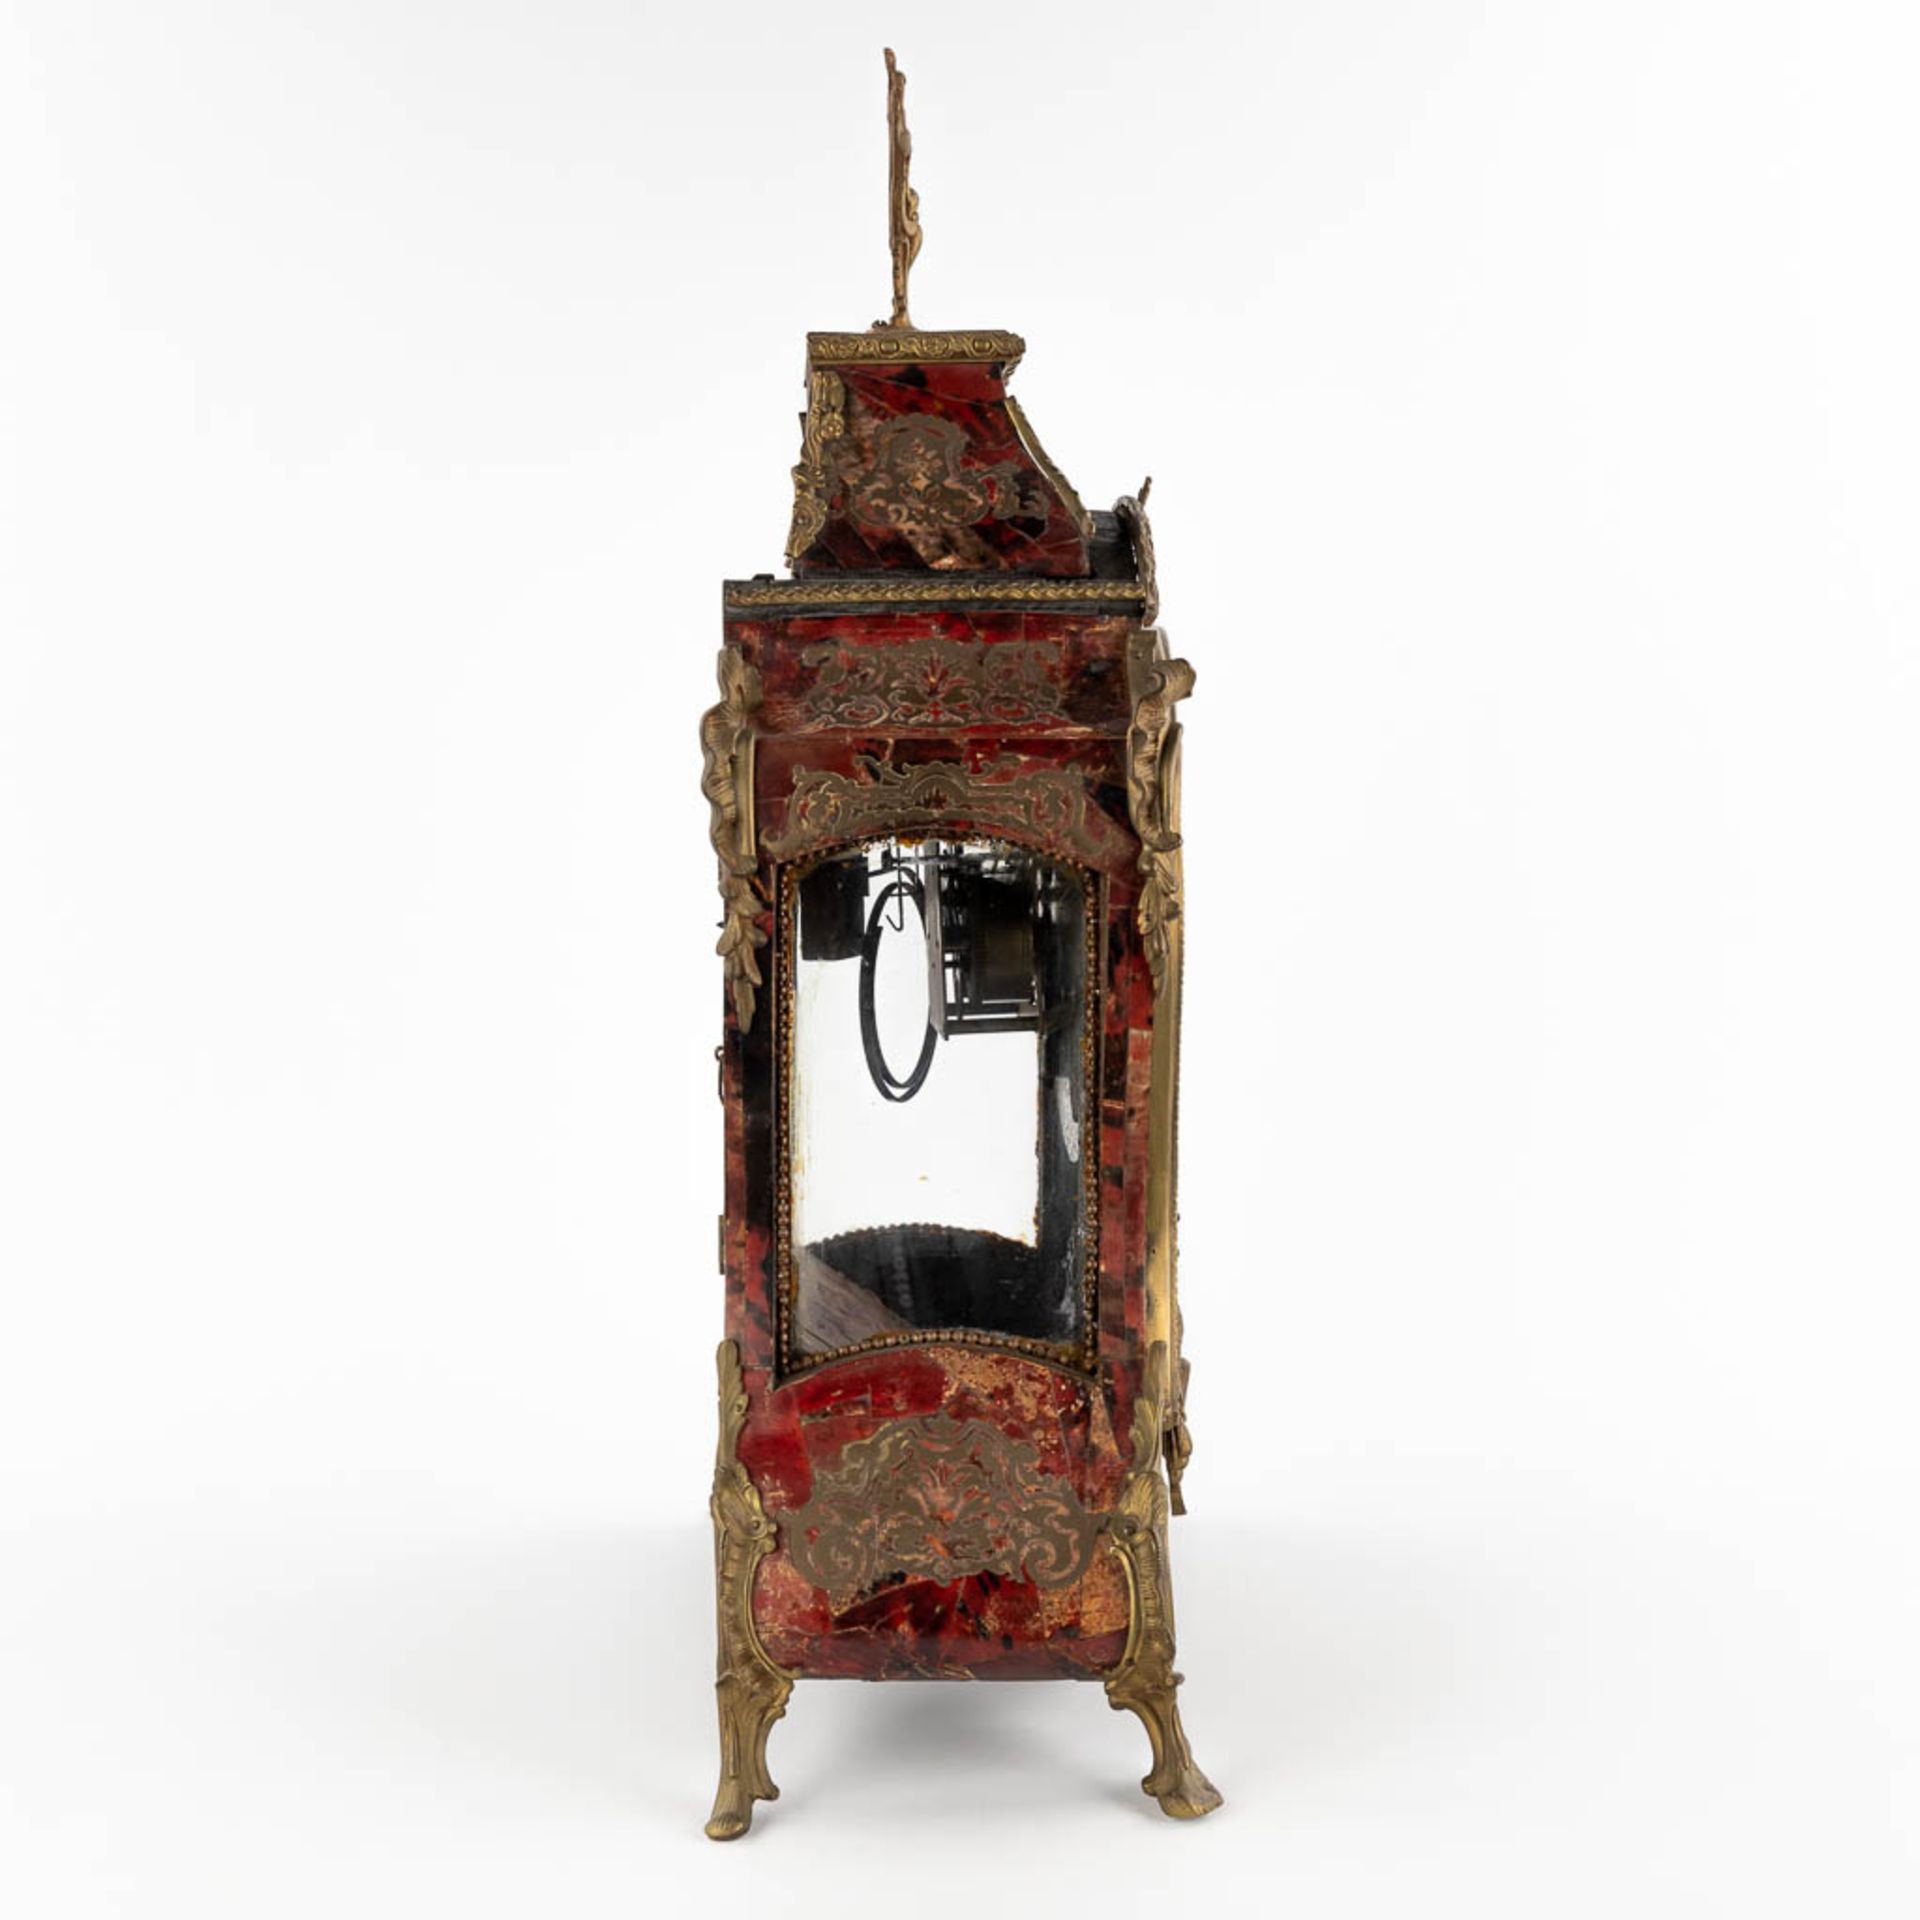 An antique mantle clock, tortoiseshell and copper inlay, early 20th C. (D:18 x W:38 x H:65 cm) - Bild 5 aus 15